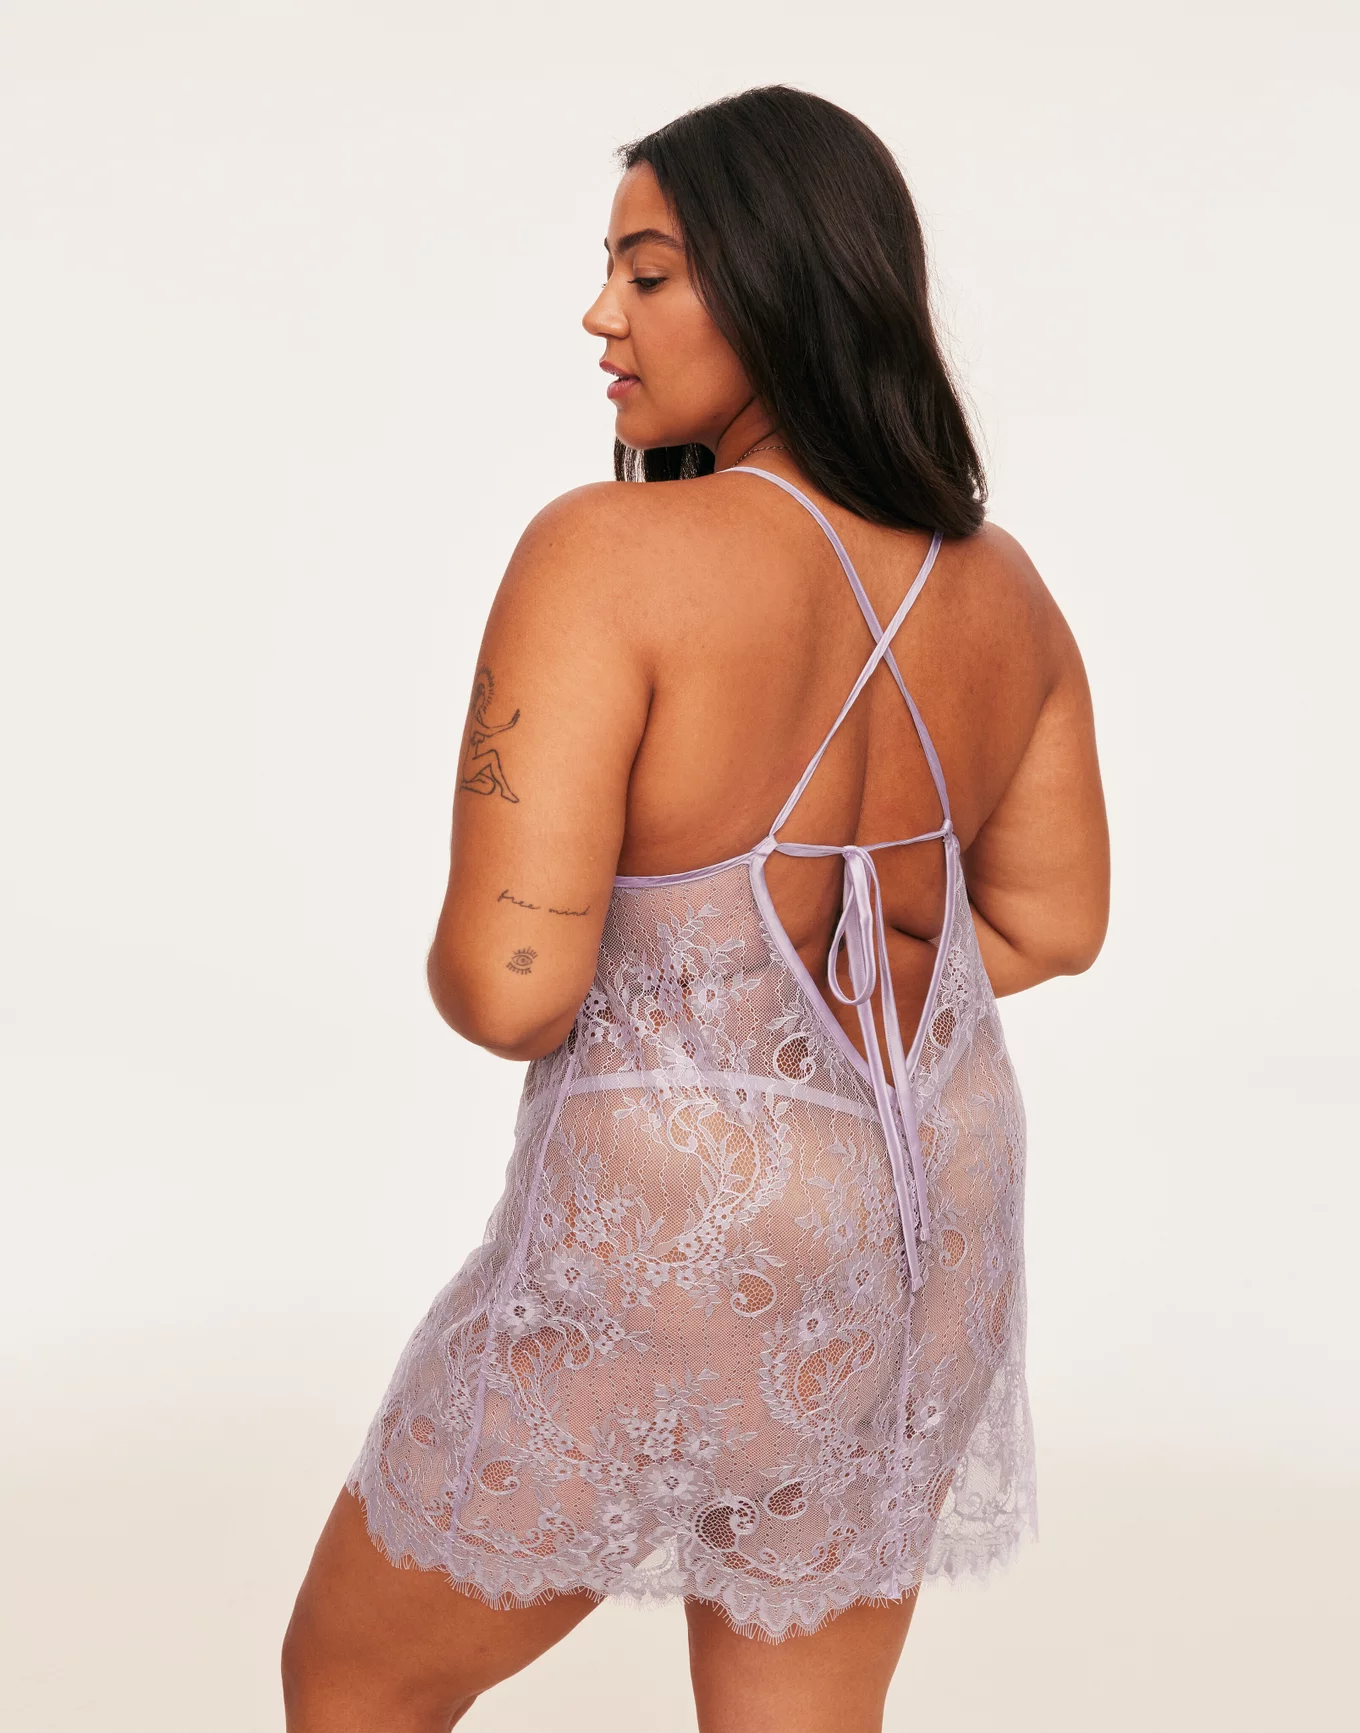 Lace and Mesh Babydoll - Dusky orchid